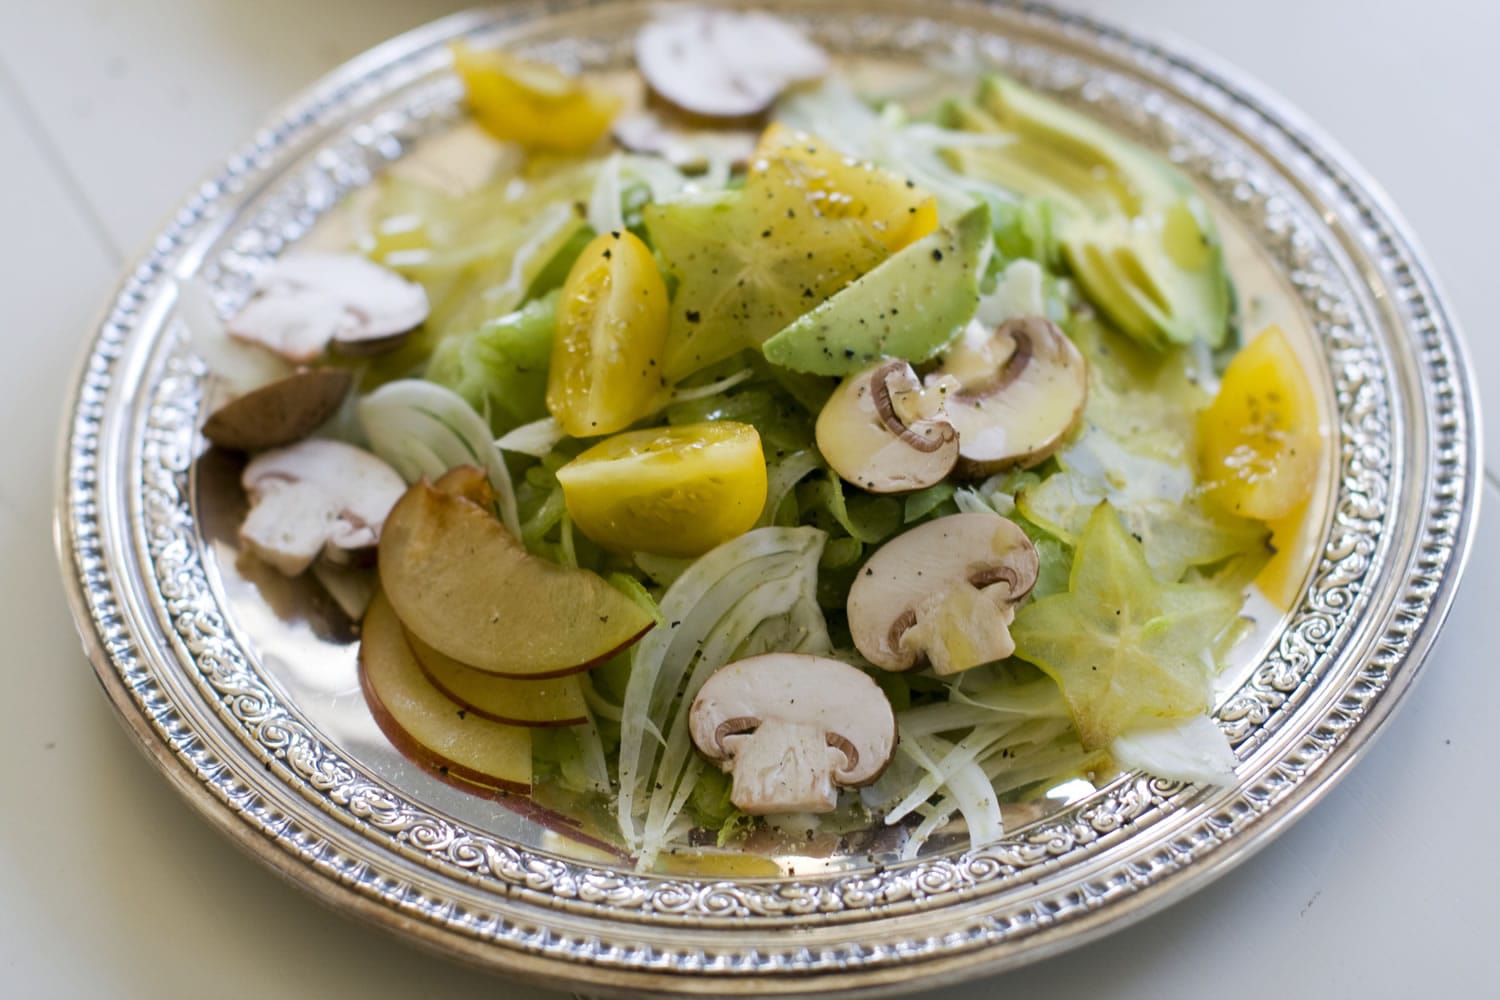 The humble celery stalk is the foundation for this crunchy salad.